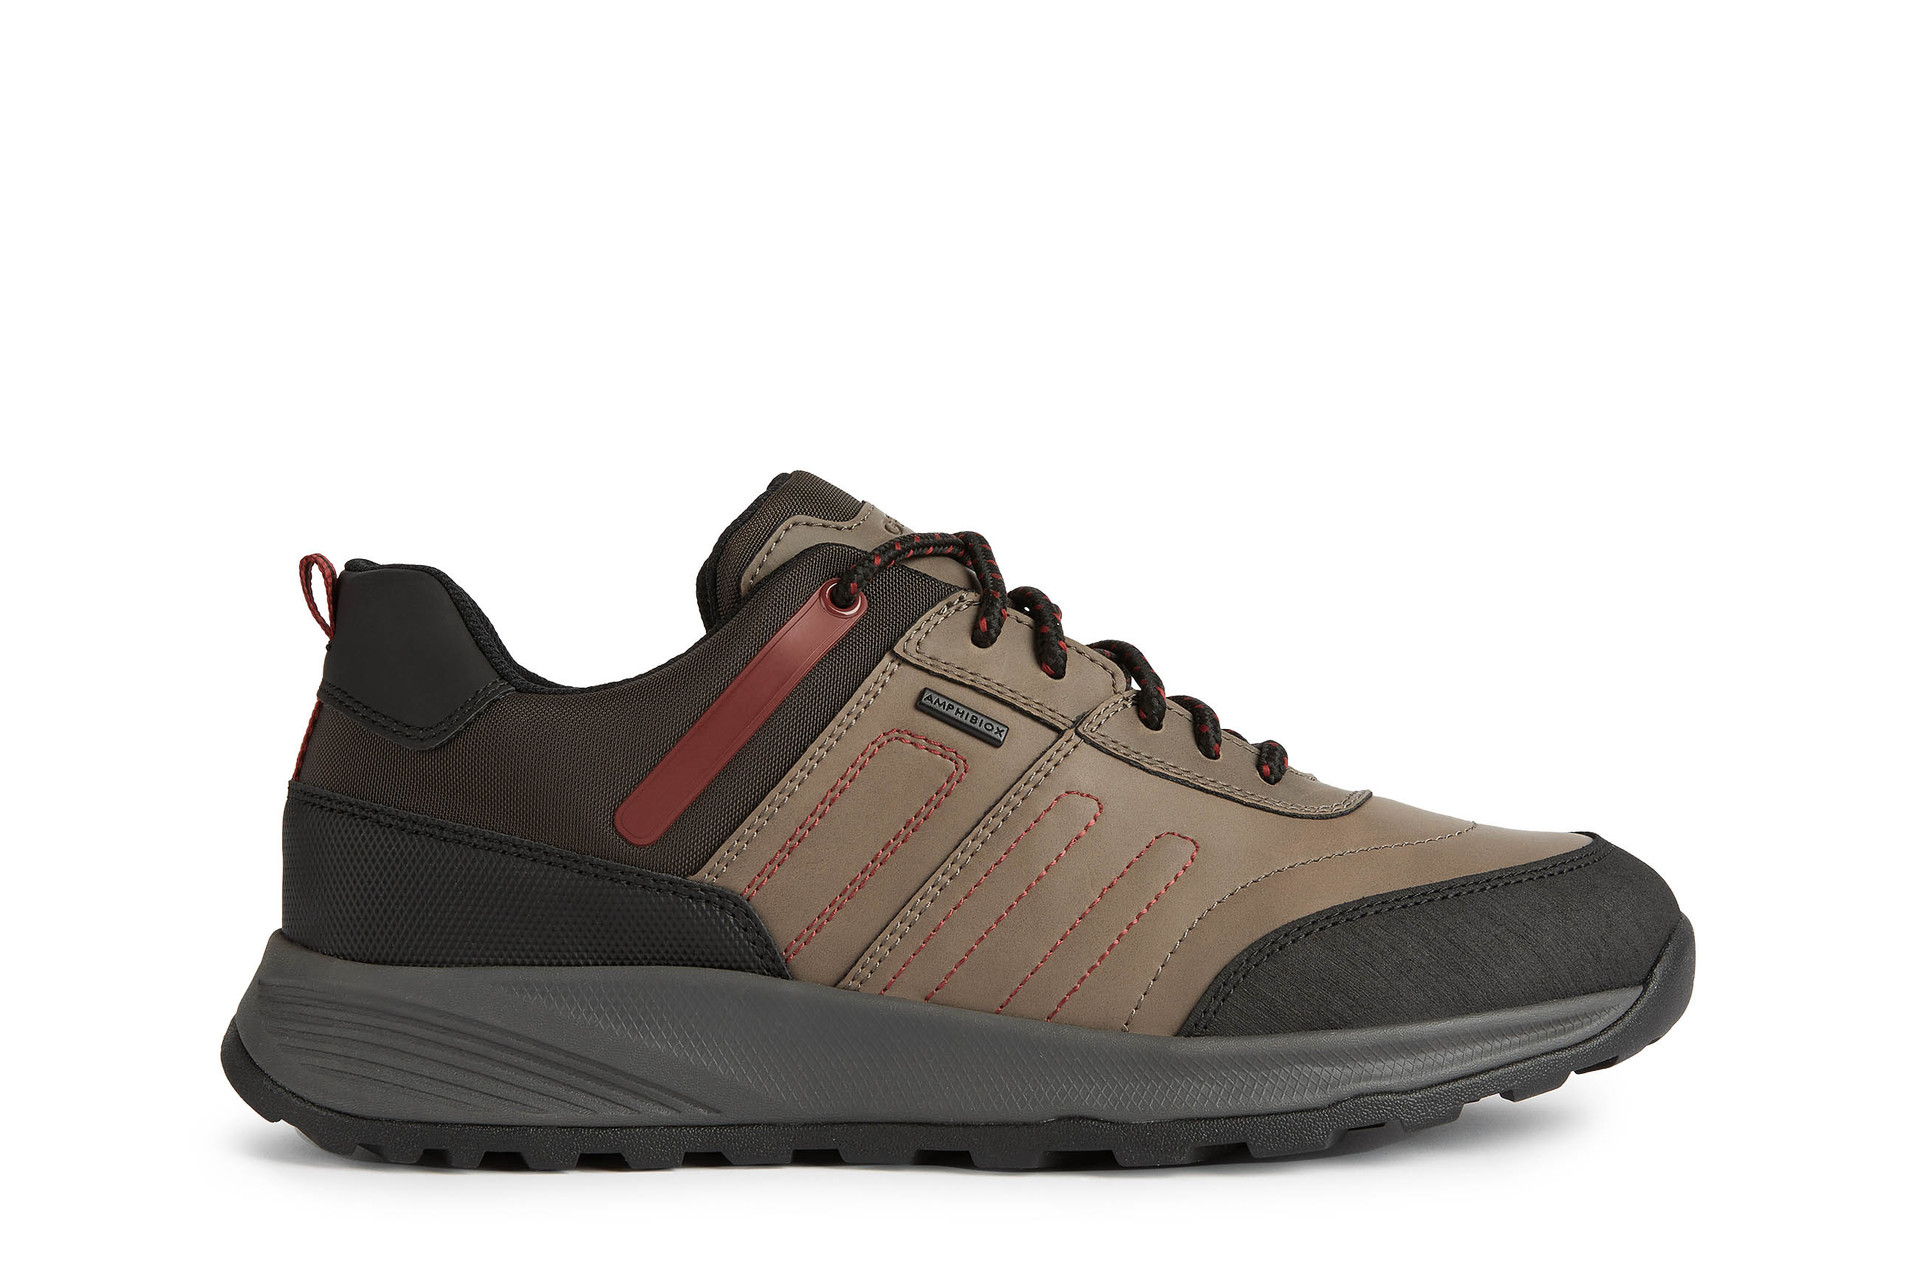 GEOX Terrestre B - Dove Grey Leather/Synthetic